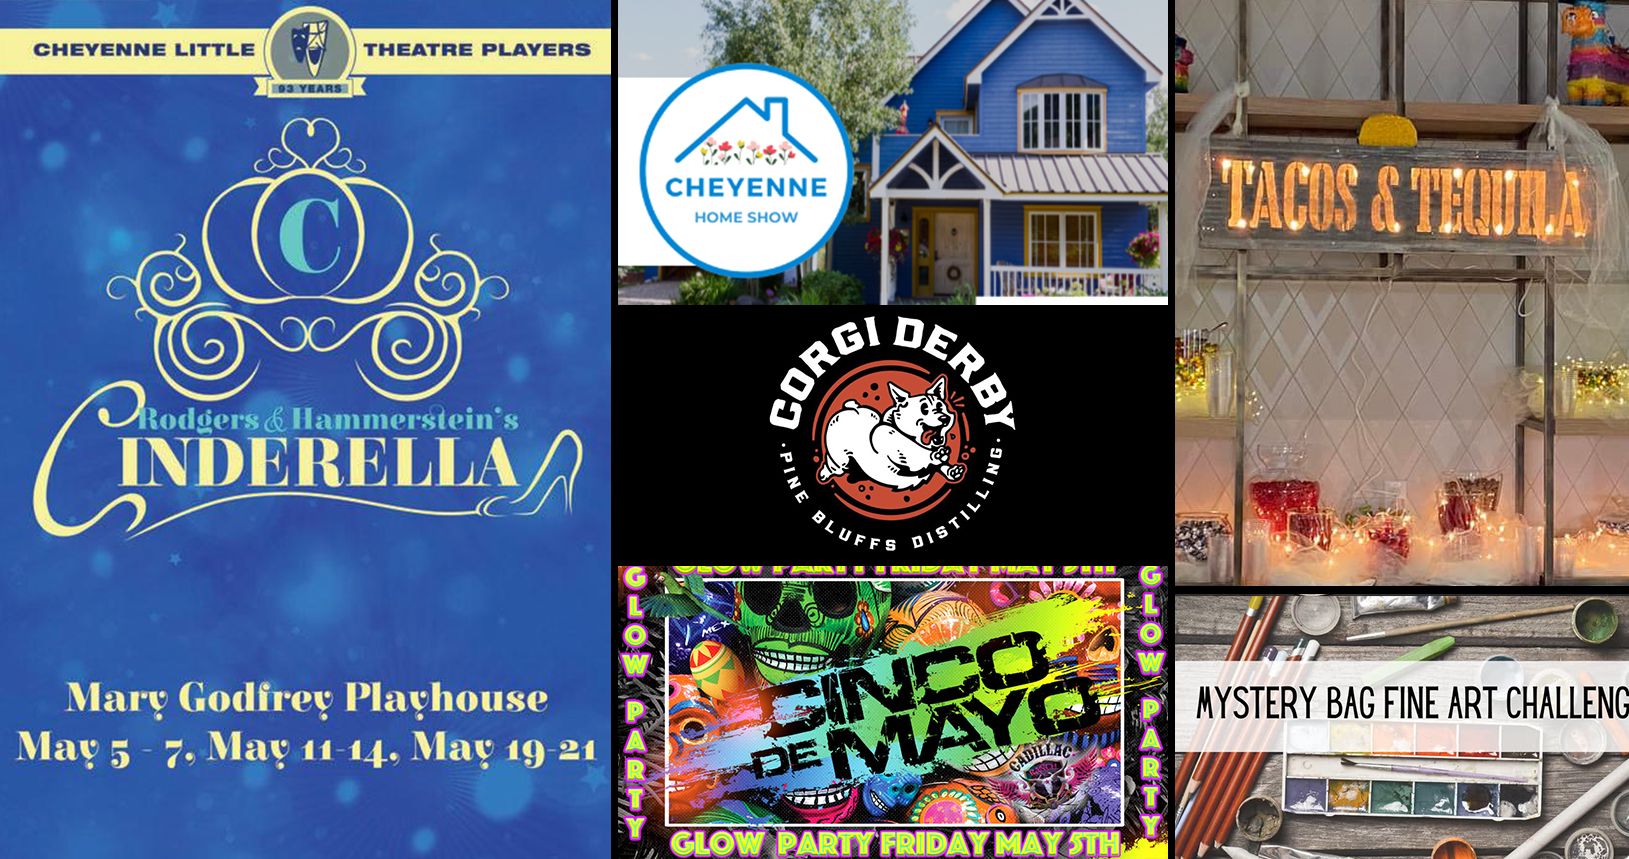 So Many Fun Things Happening This Weekend - Take A Look!